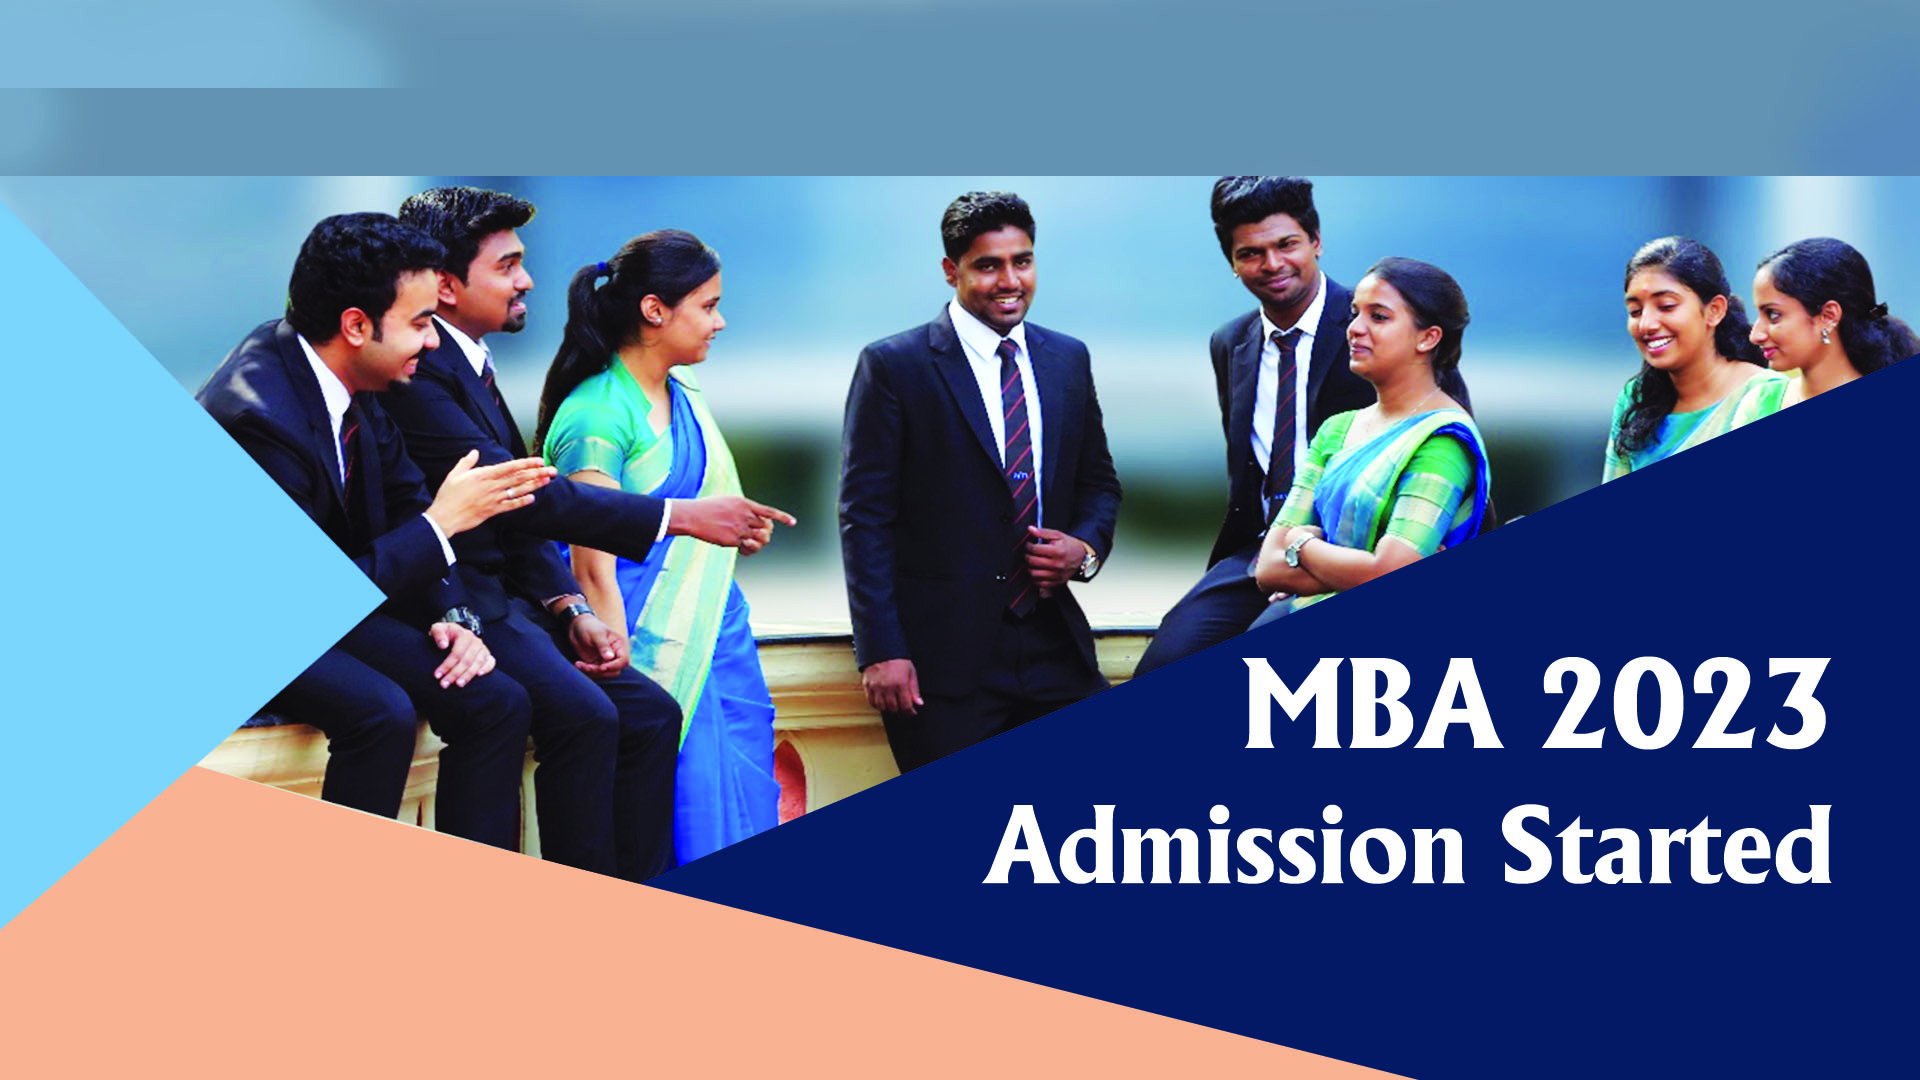 MBA 2023 Admission Started